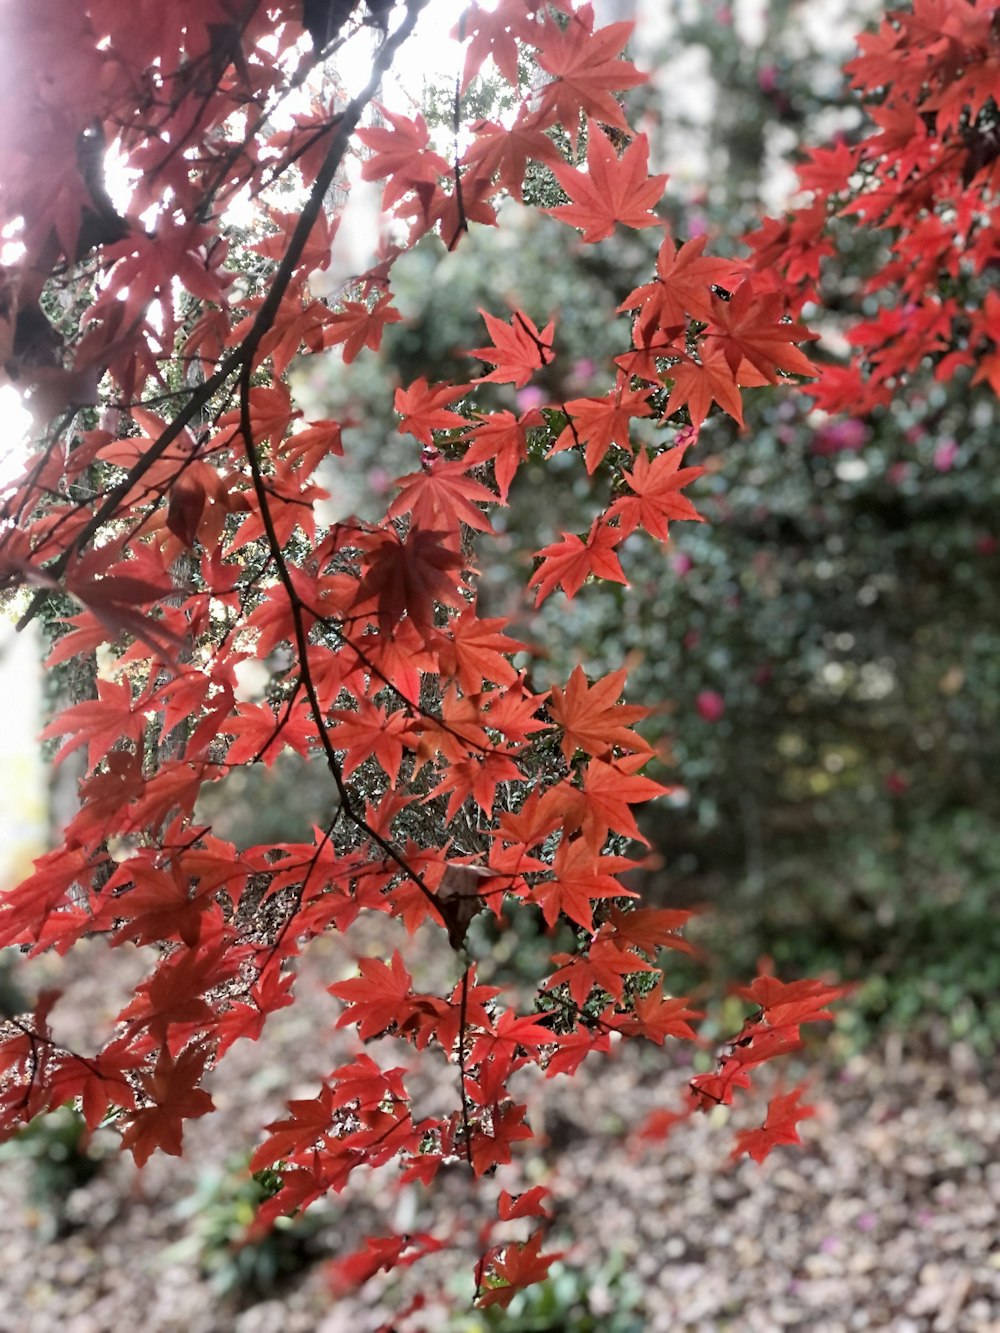 a tree with red leaves in a park